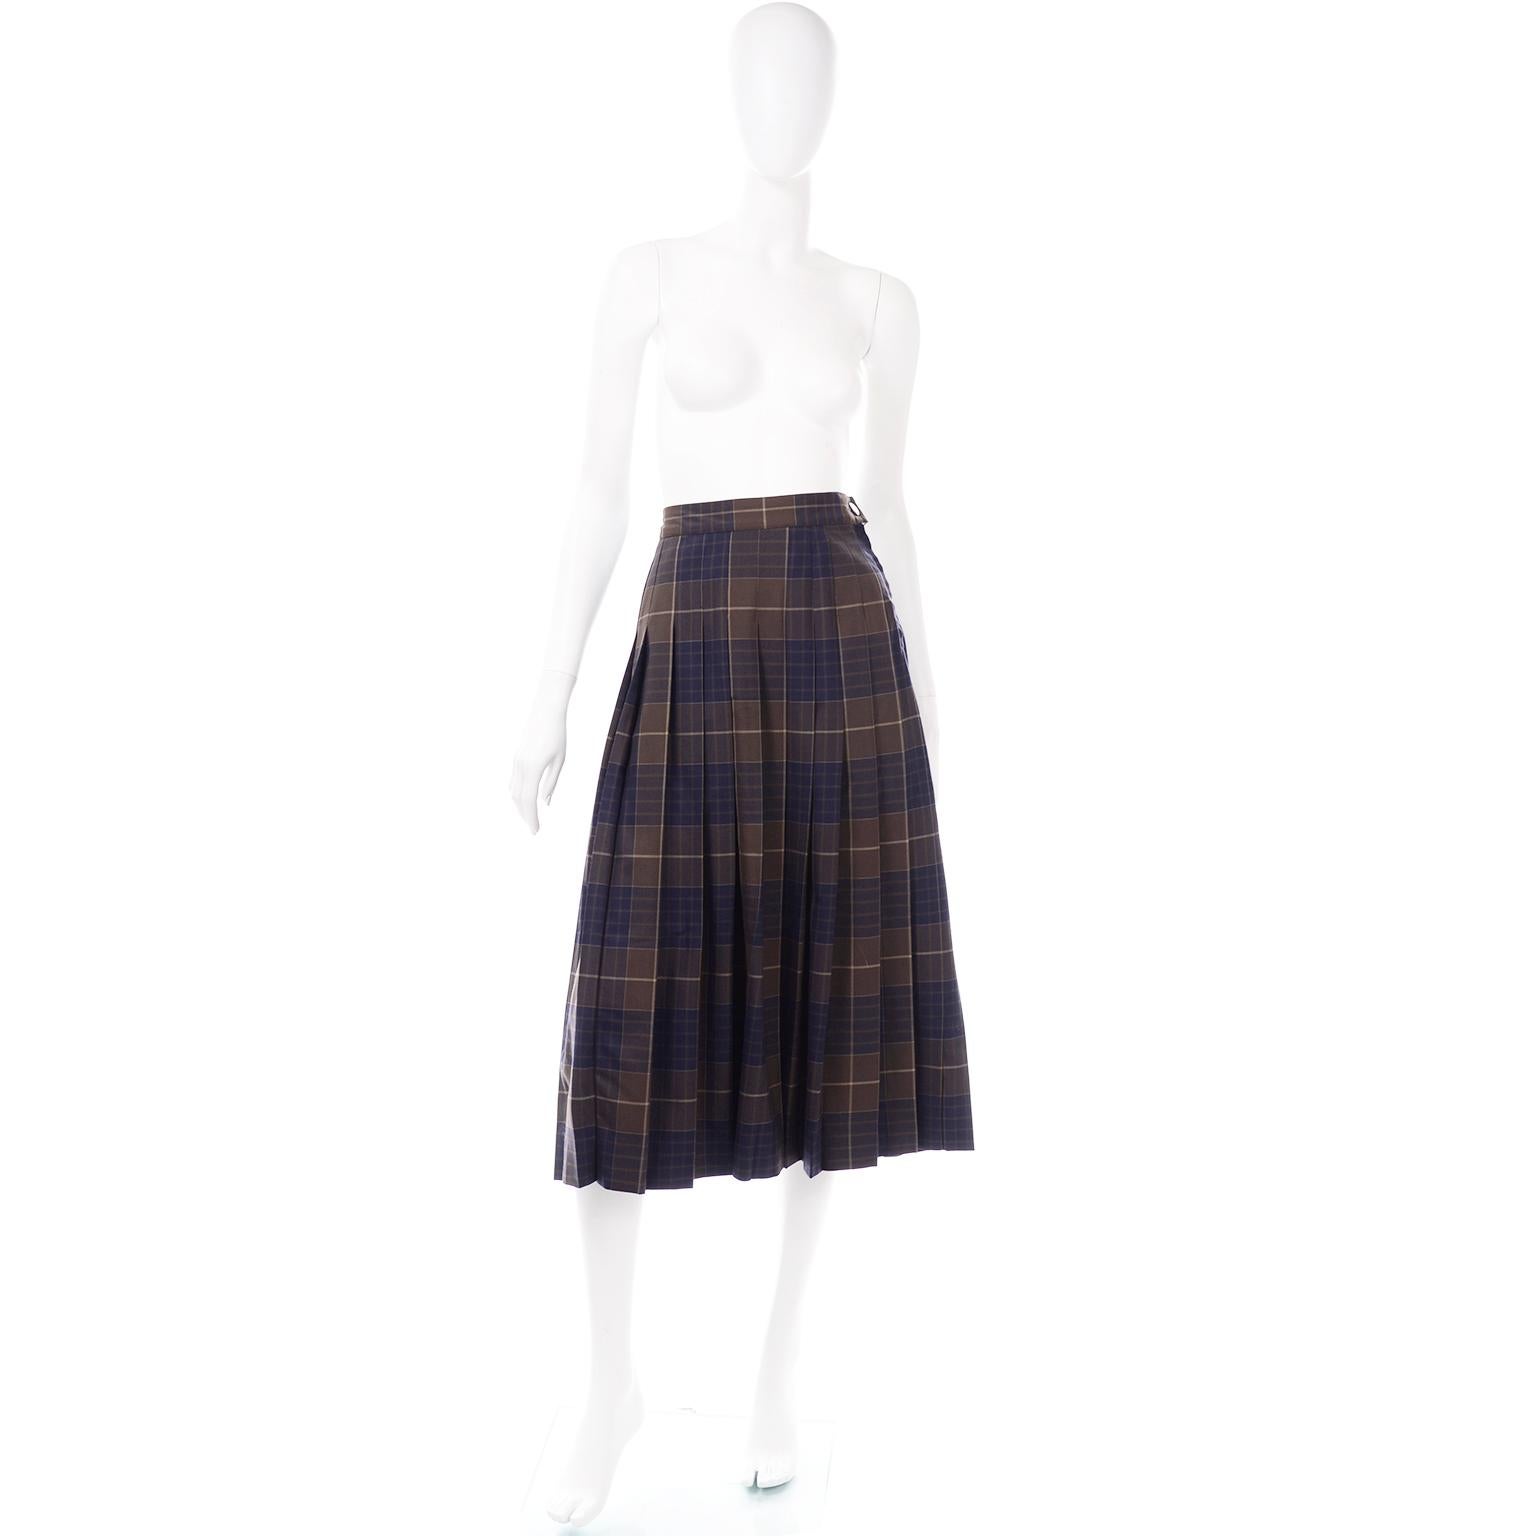 This is a lovely midi length pleated wool skirt by Salvatore Ferragamo in an olive brown and navy blue plaid. It is 100% wool, with knife pleats with a fixed waistband, and a zipper and button at the side for closure. We love the highlands look of